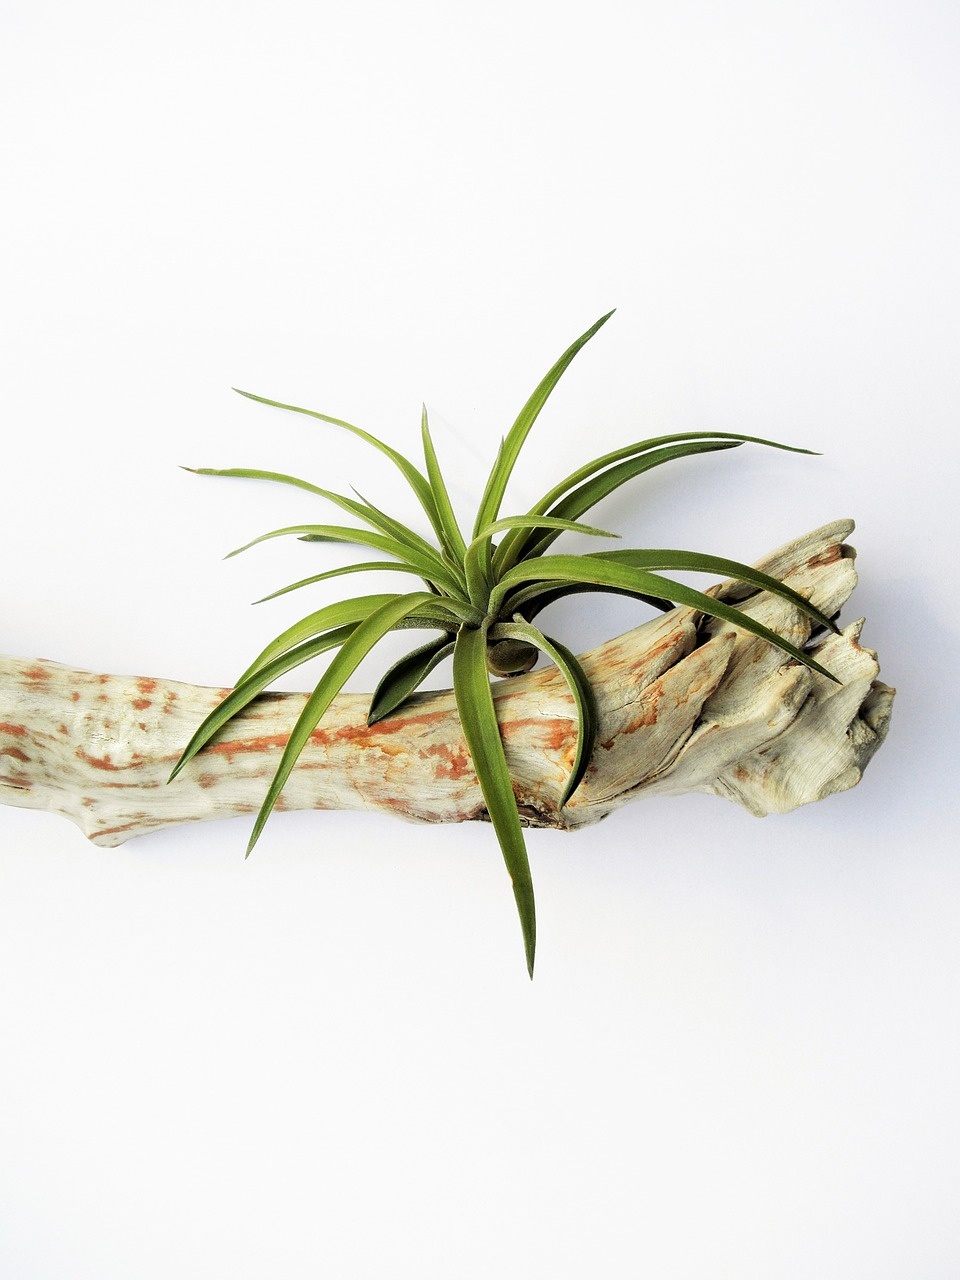 All About Air Plants